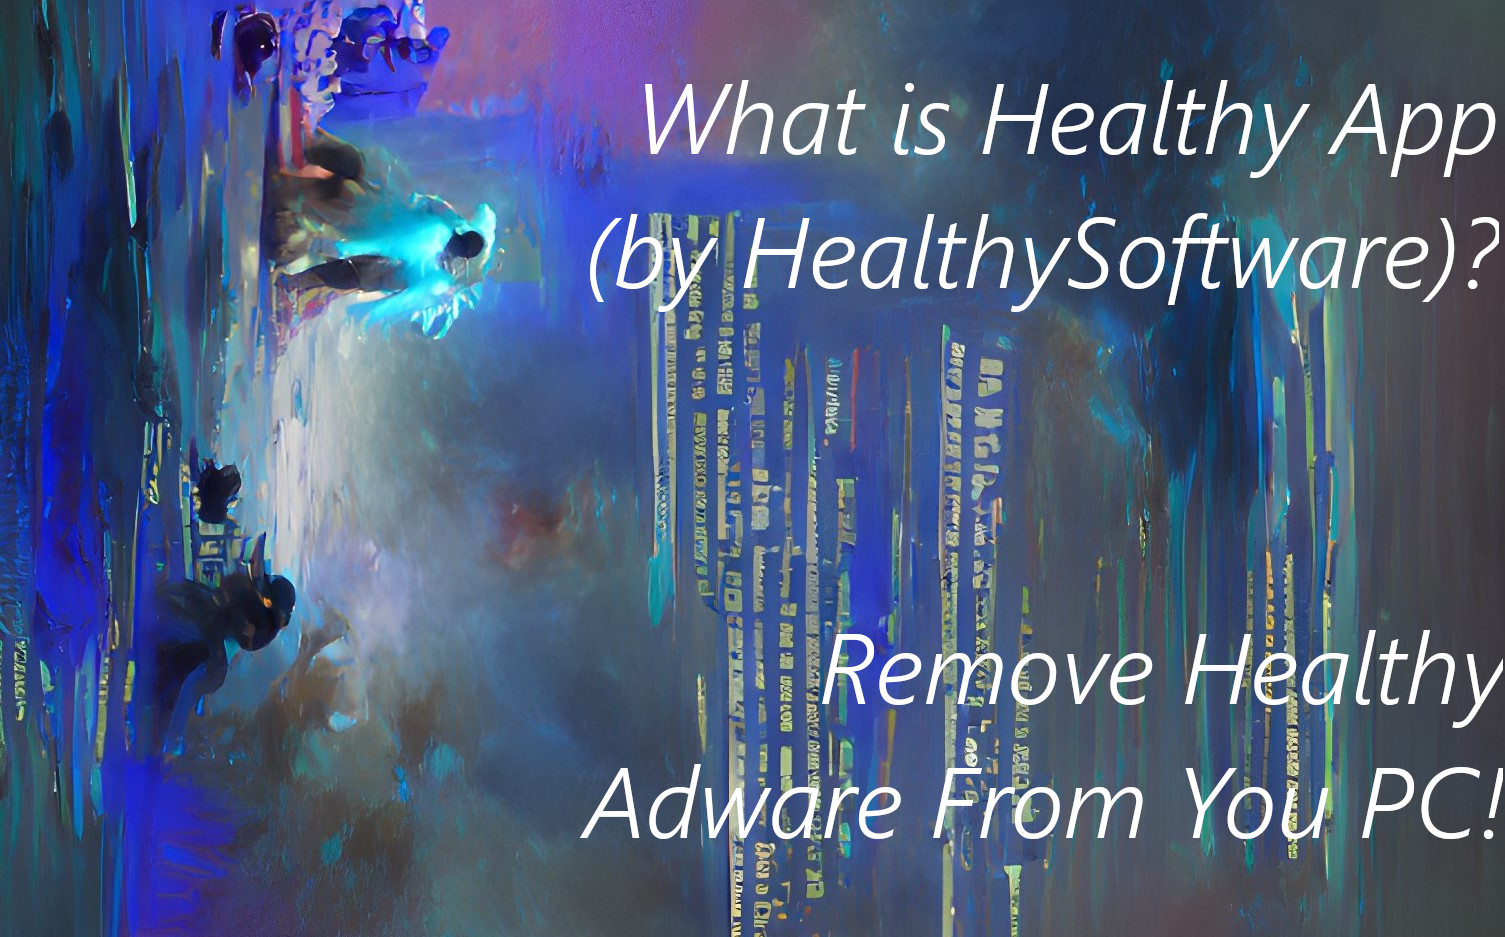 Healthy Adware by HealthySoftware — How to remove?